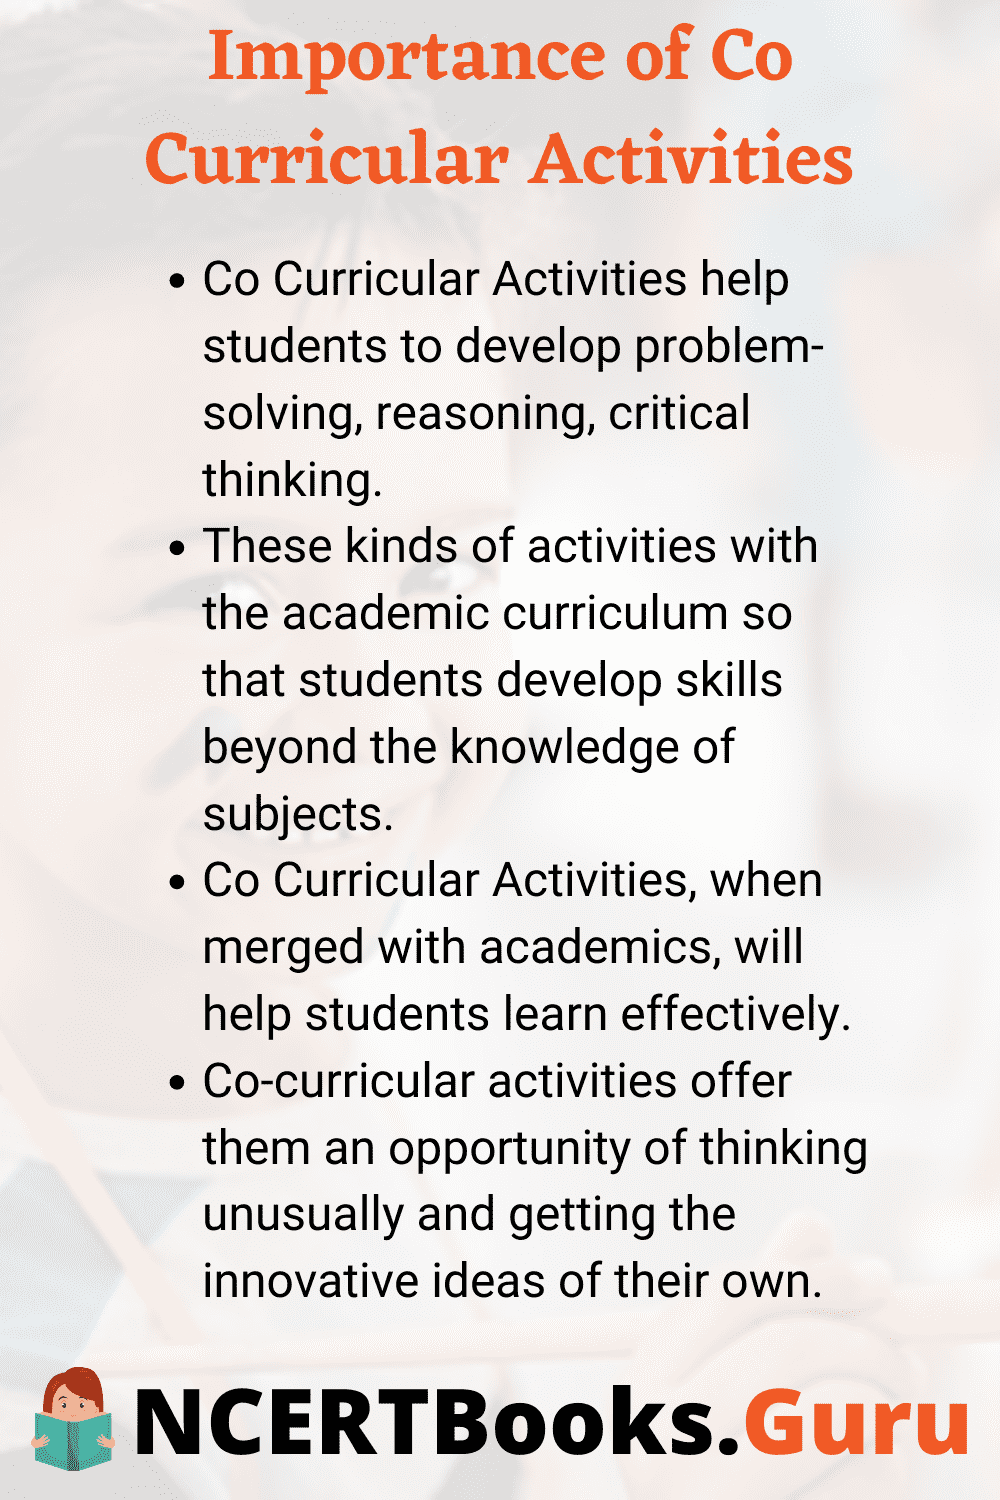 Importance of Co Curricular Activities